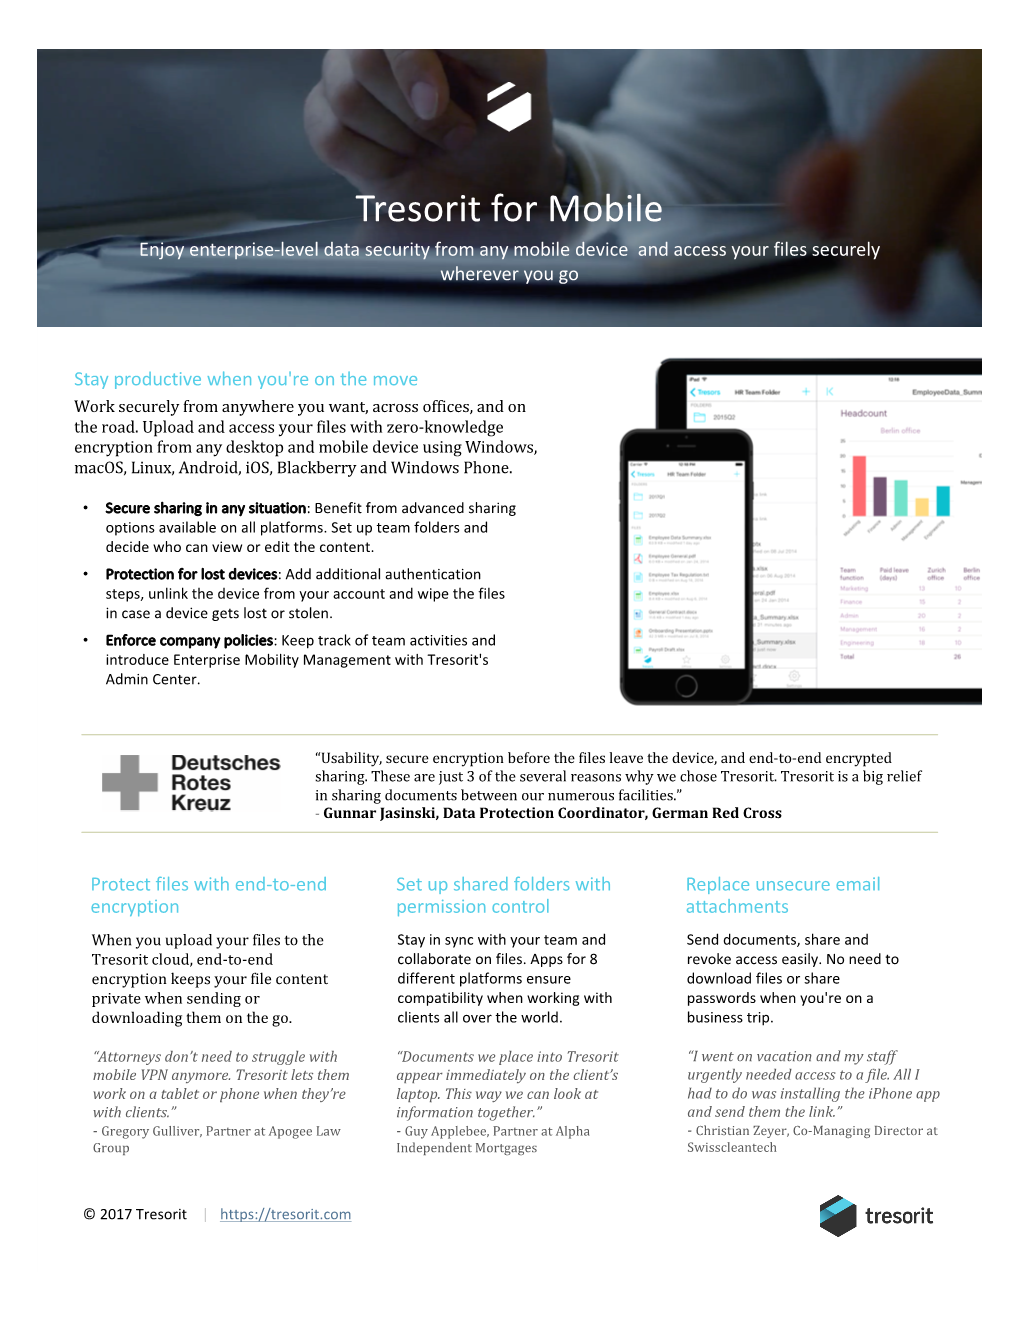 Tresorit for Mobile Enjoy Enterprise-Level Data Security from Any Mobile Device and Access Your Files Securely Wherever You Go